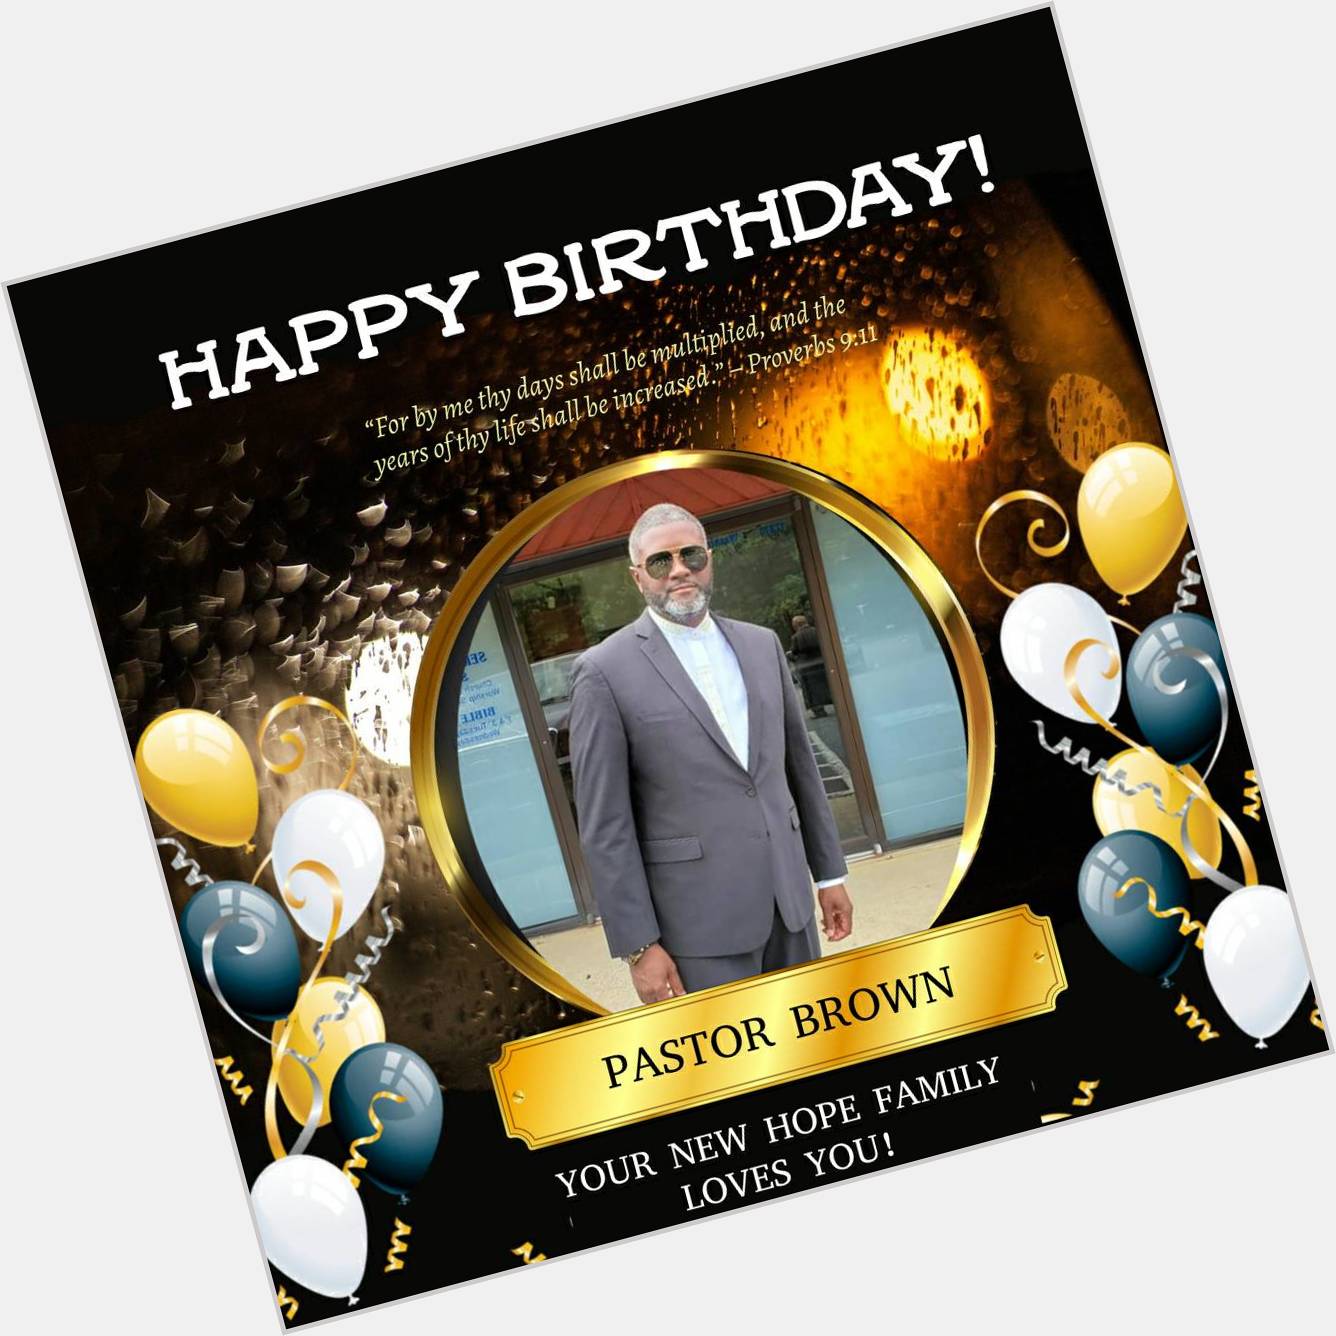 Happy Birthday Pastor Derrick Brown! May God continue to bless and keep you! We love you so much! 